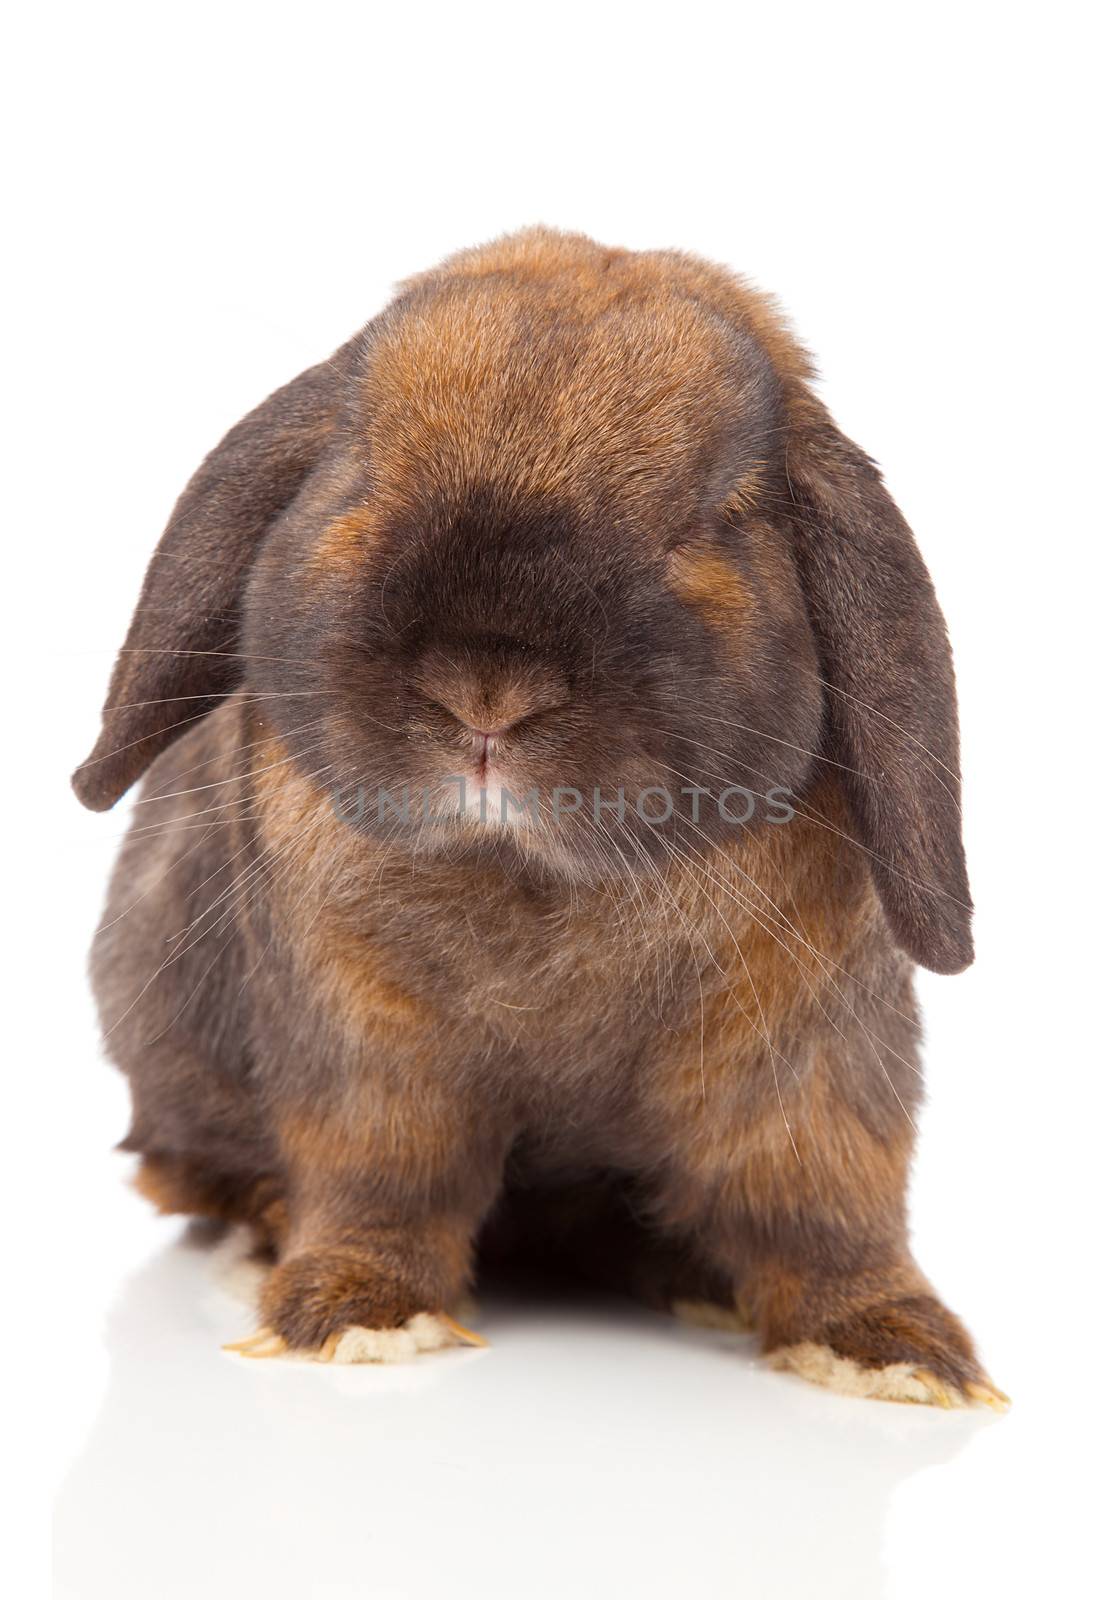 rabbit isolated on a white background by motorolka